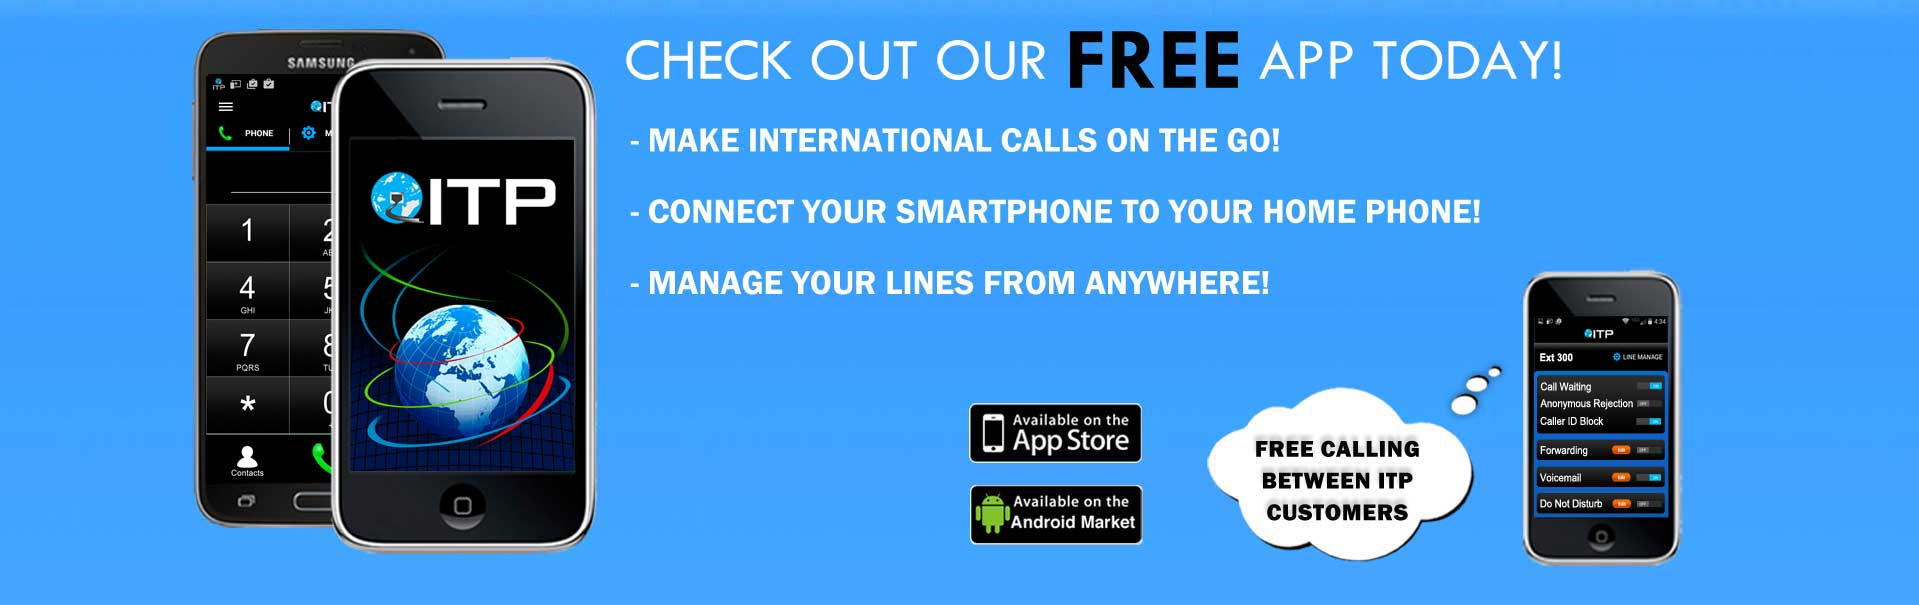 check out our free voip app